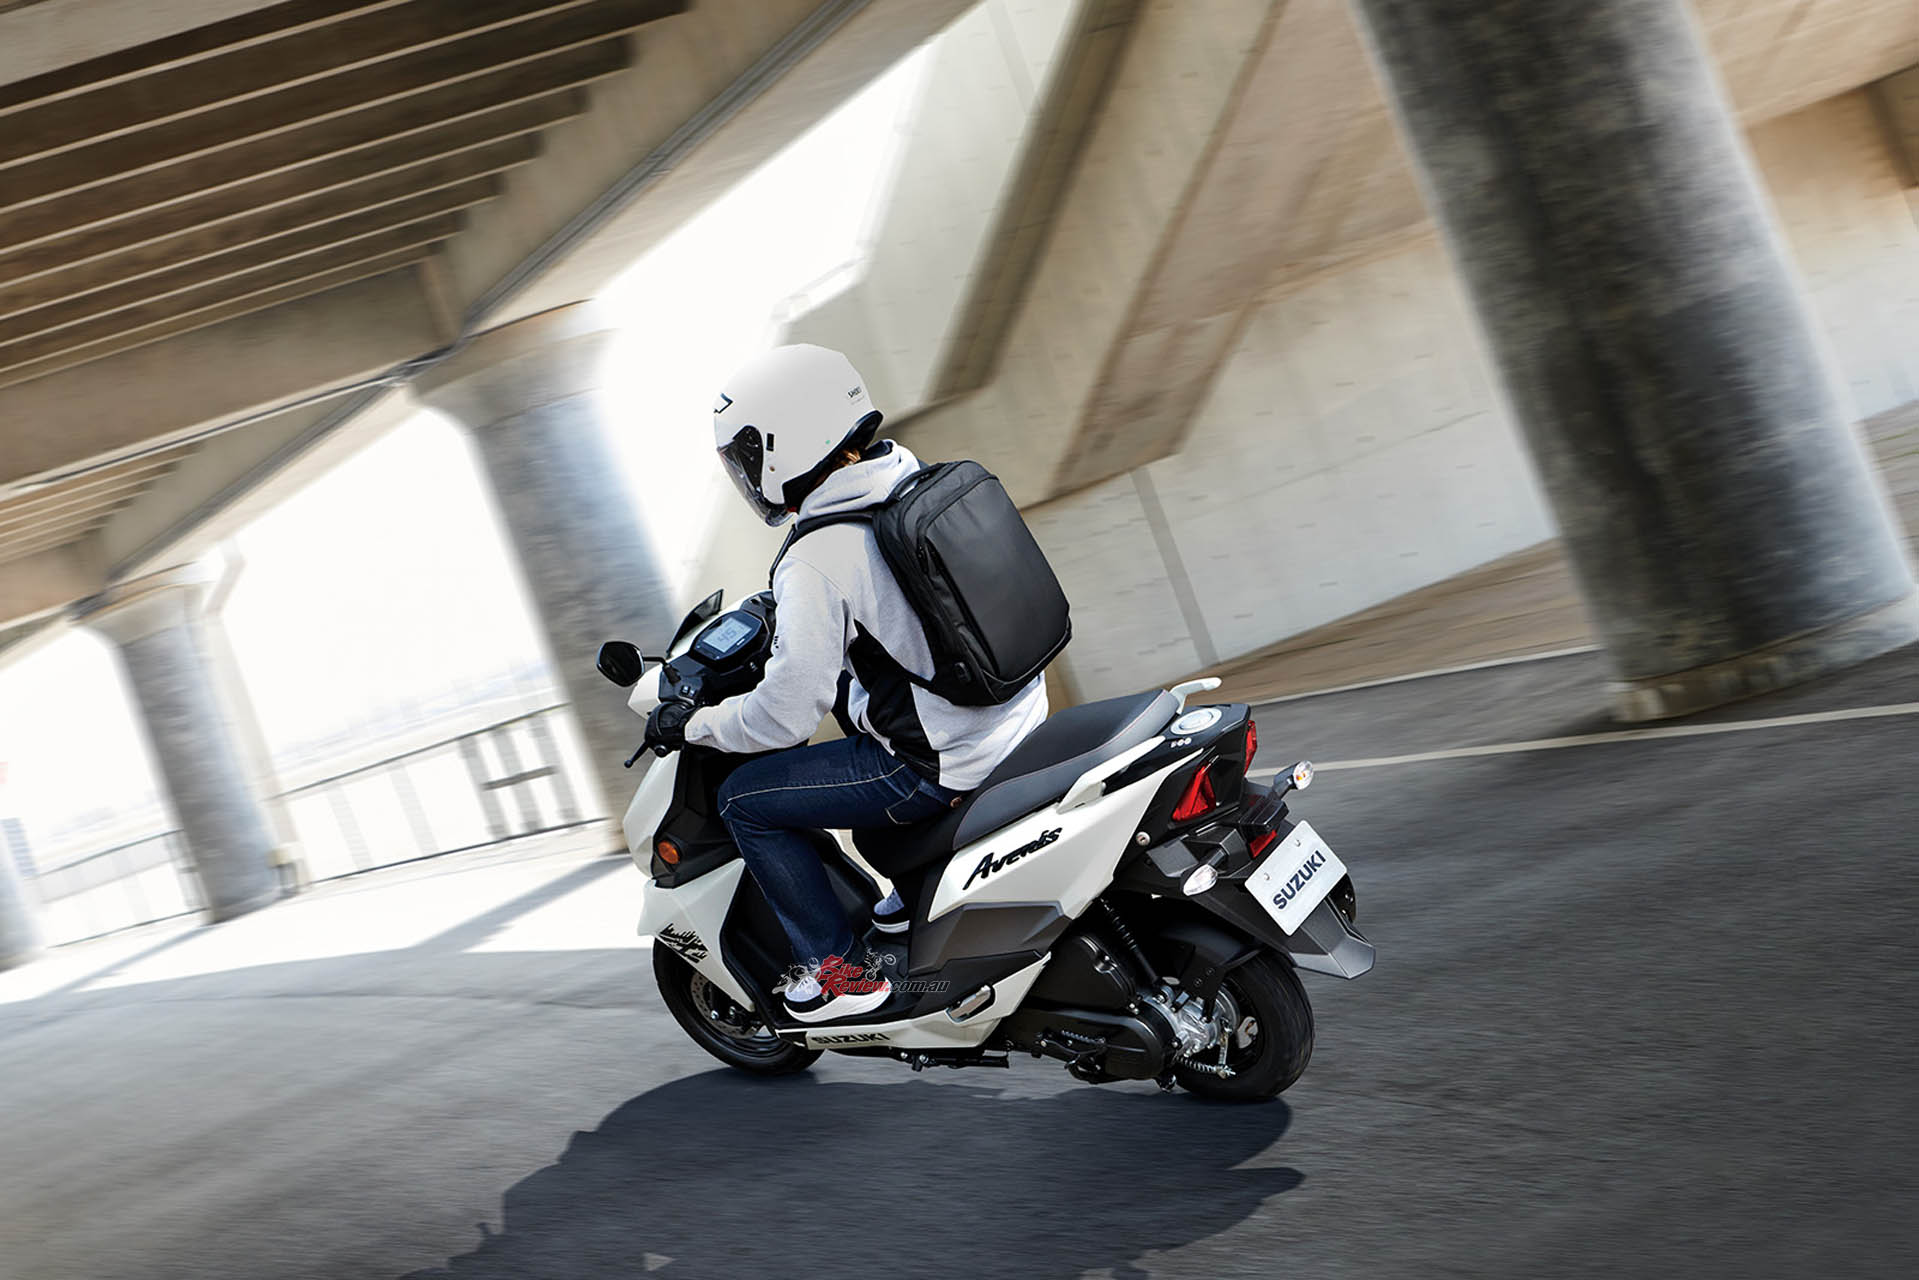 A major factor in that bulletproof engineering is Suzuki’s ‘Eco Performance’ technology.